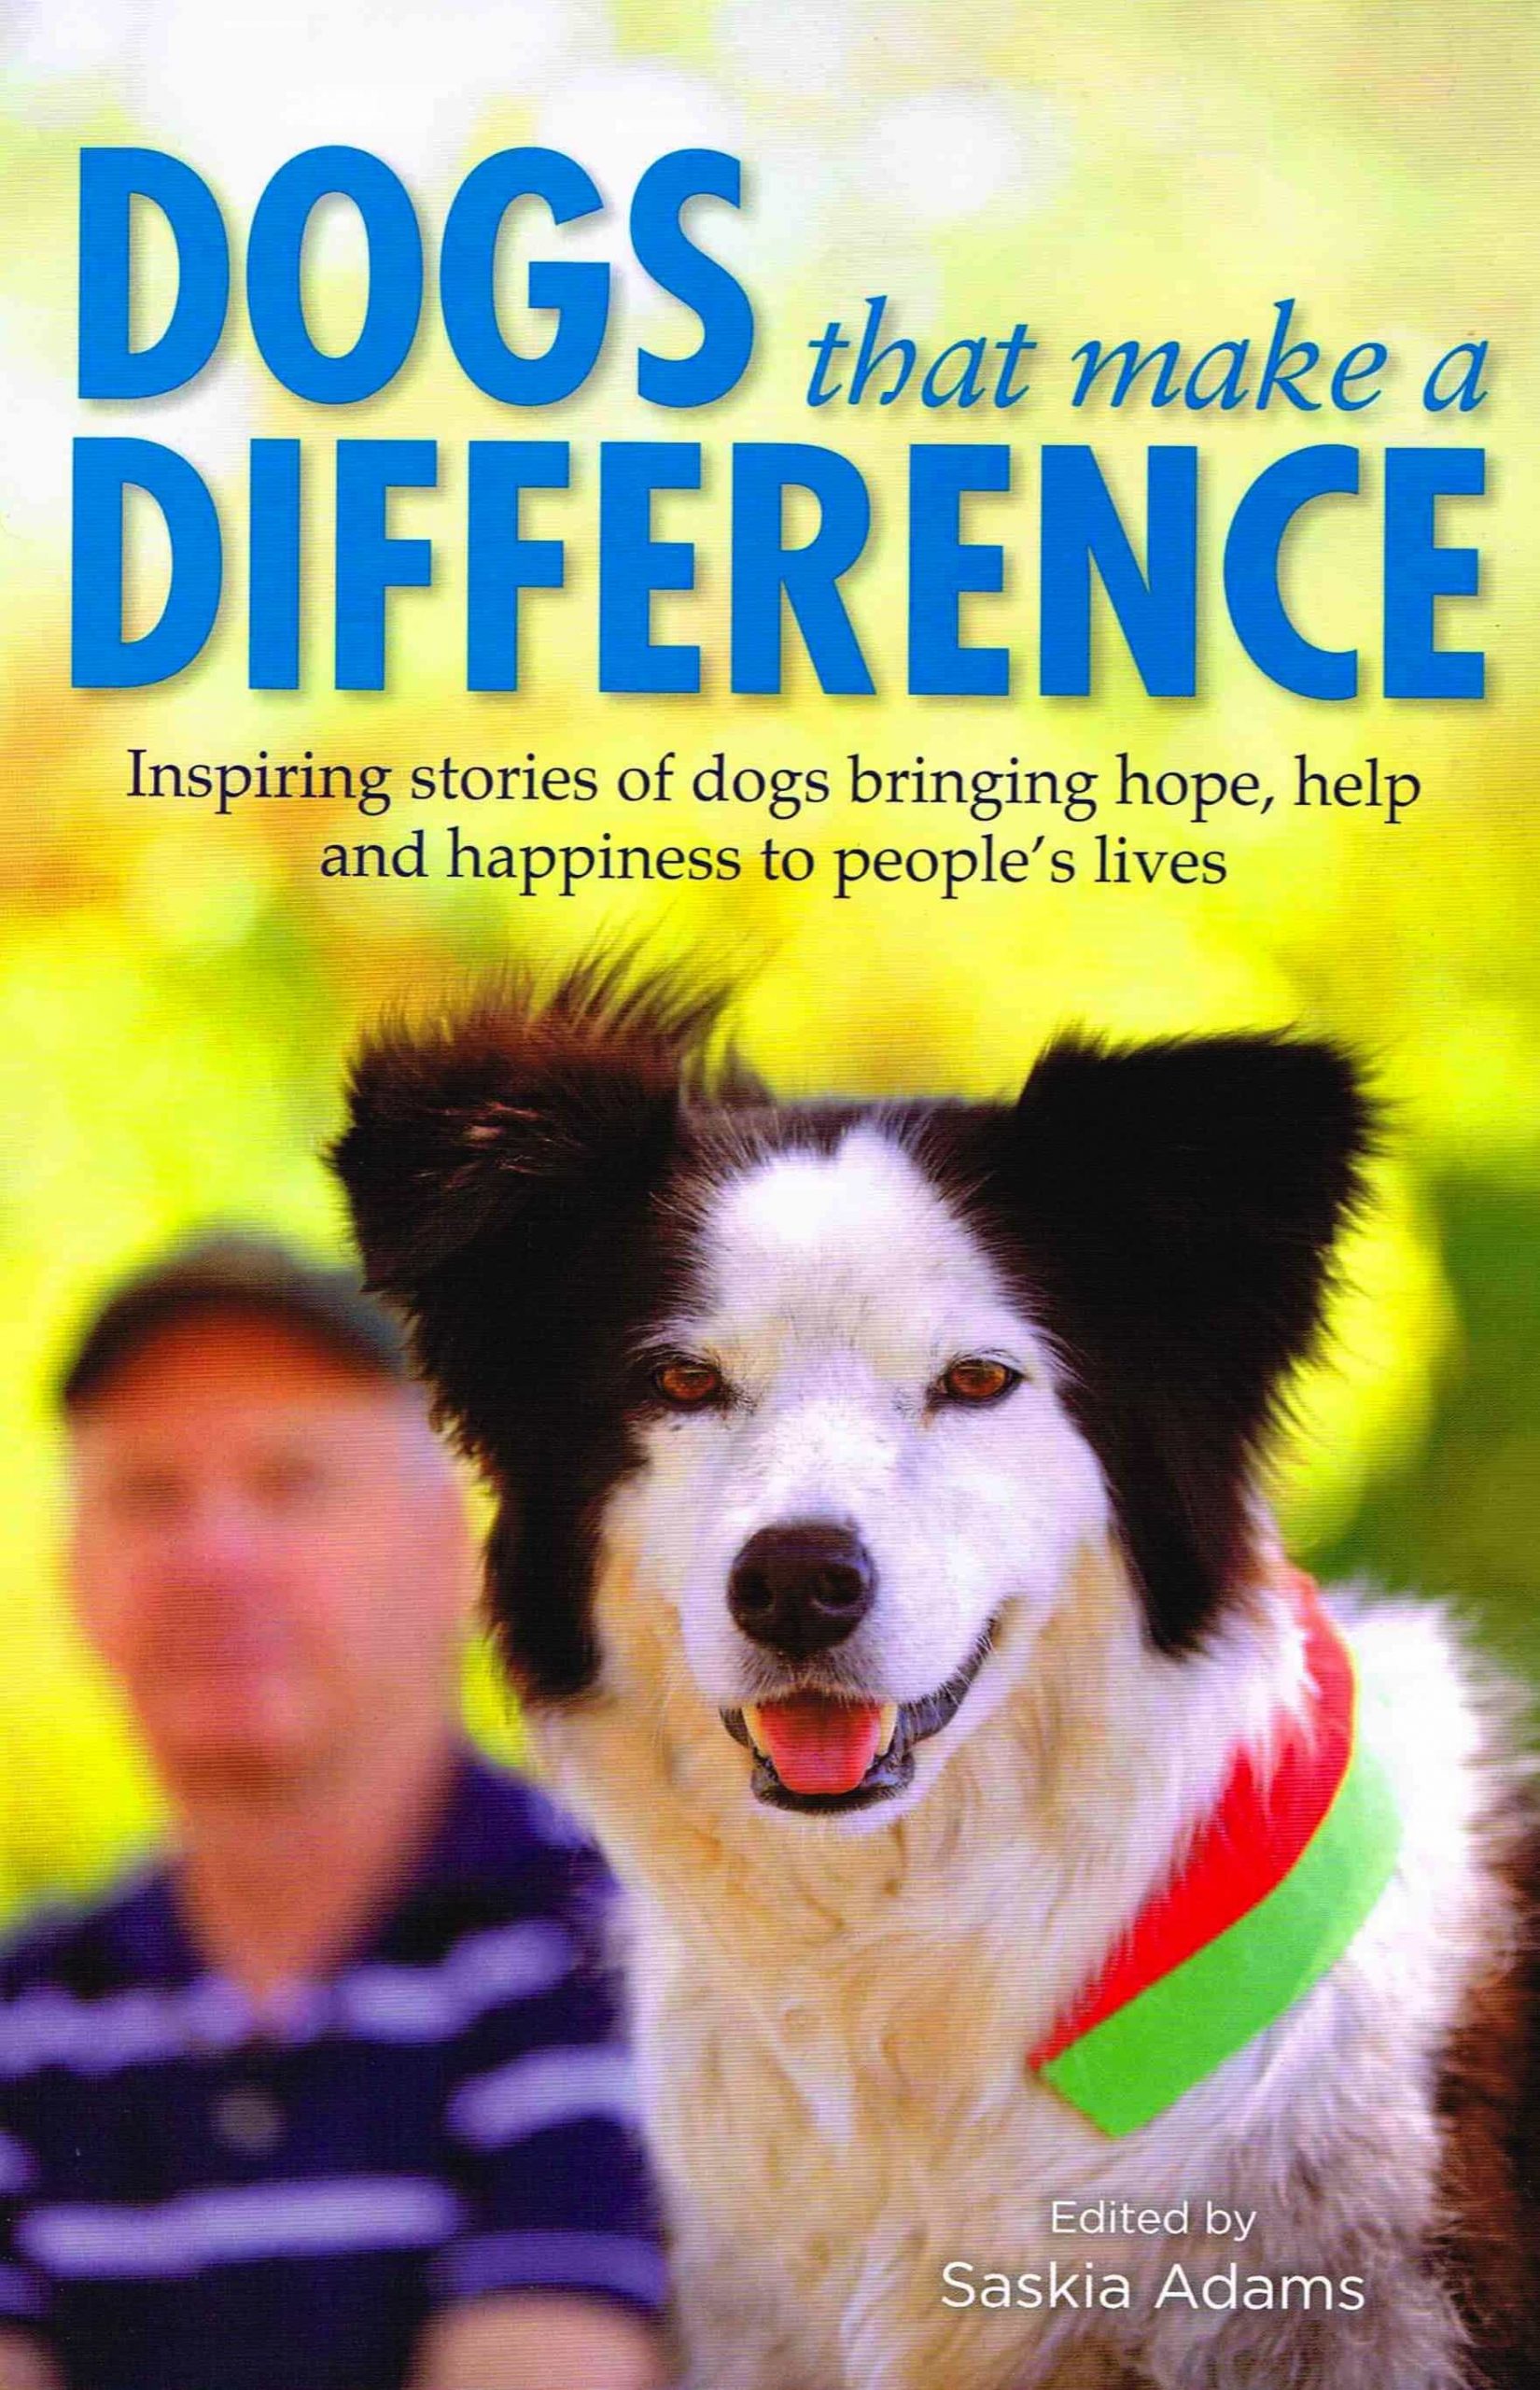 Dogs that make a difference_FRONT COVER